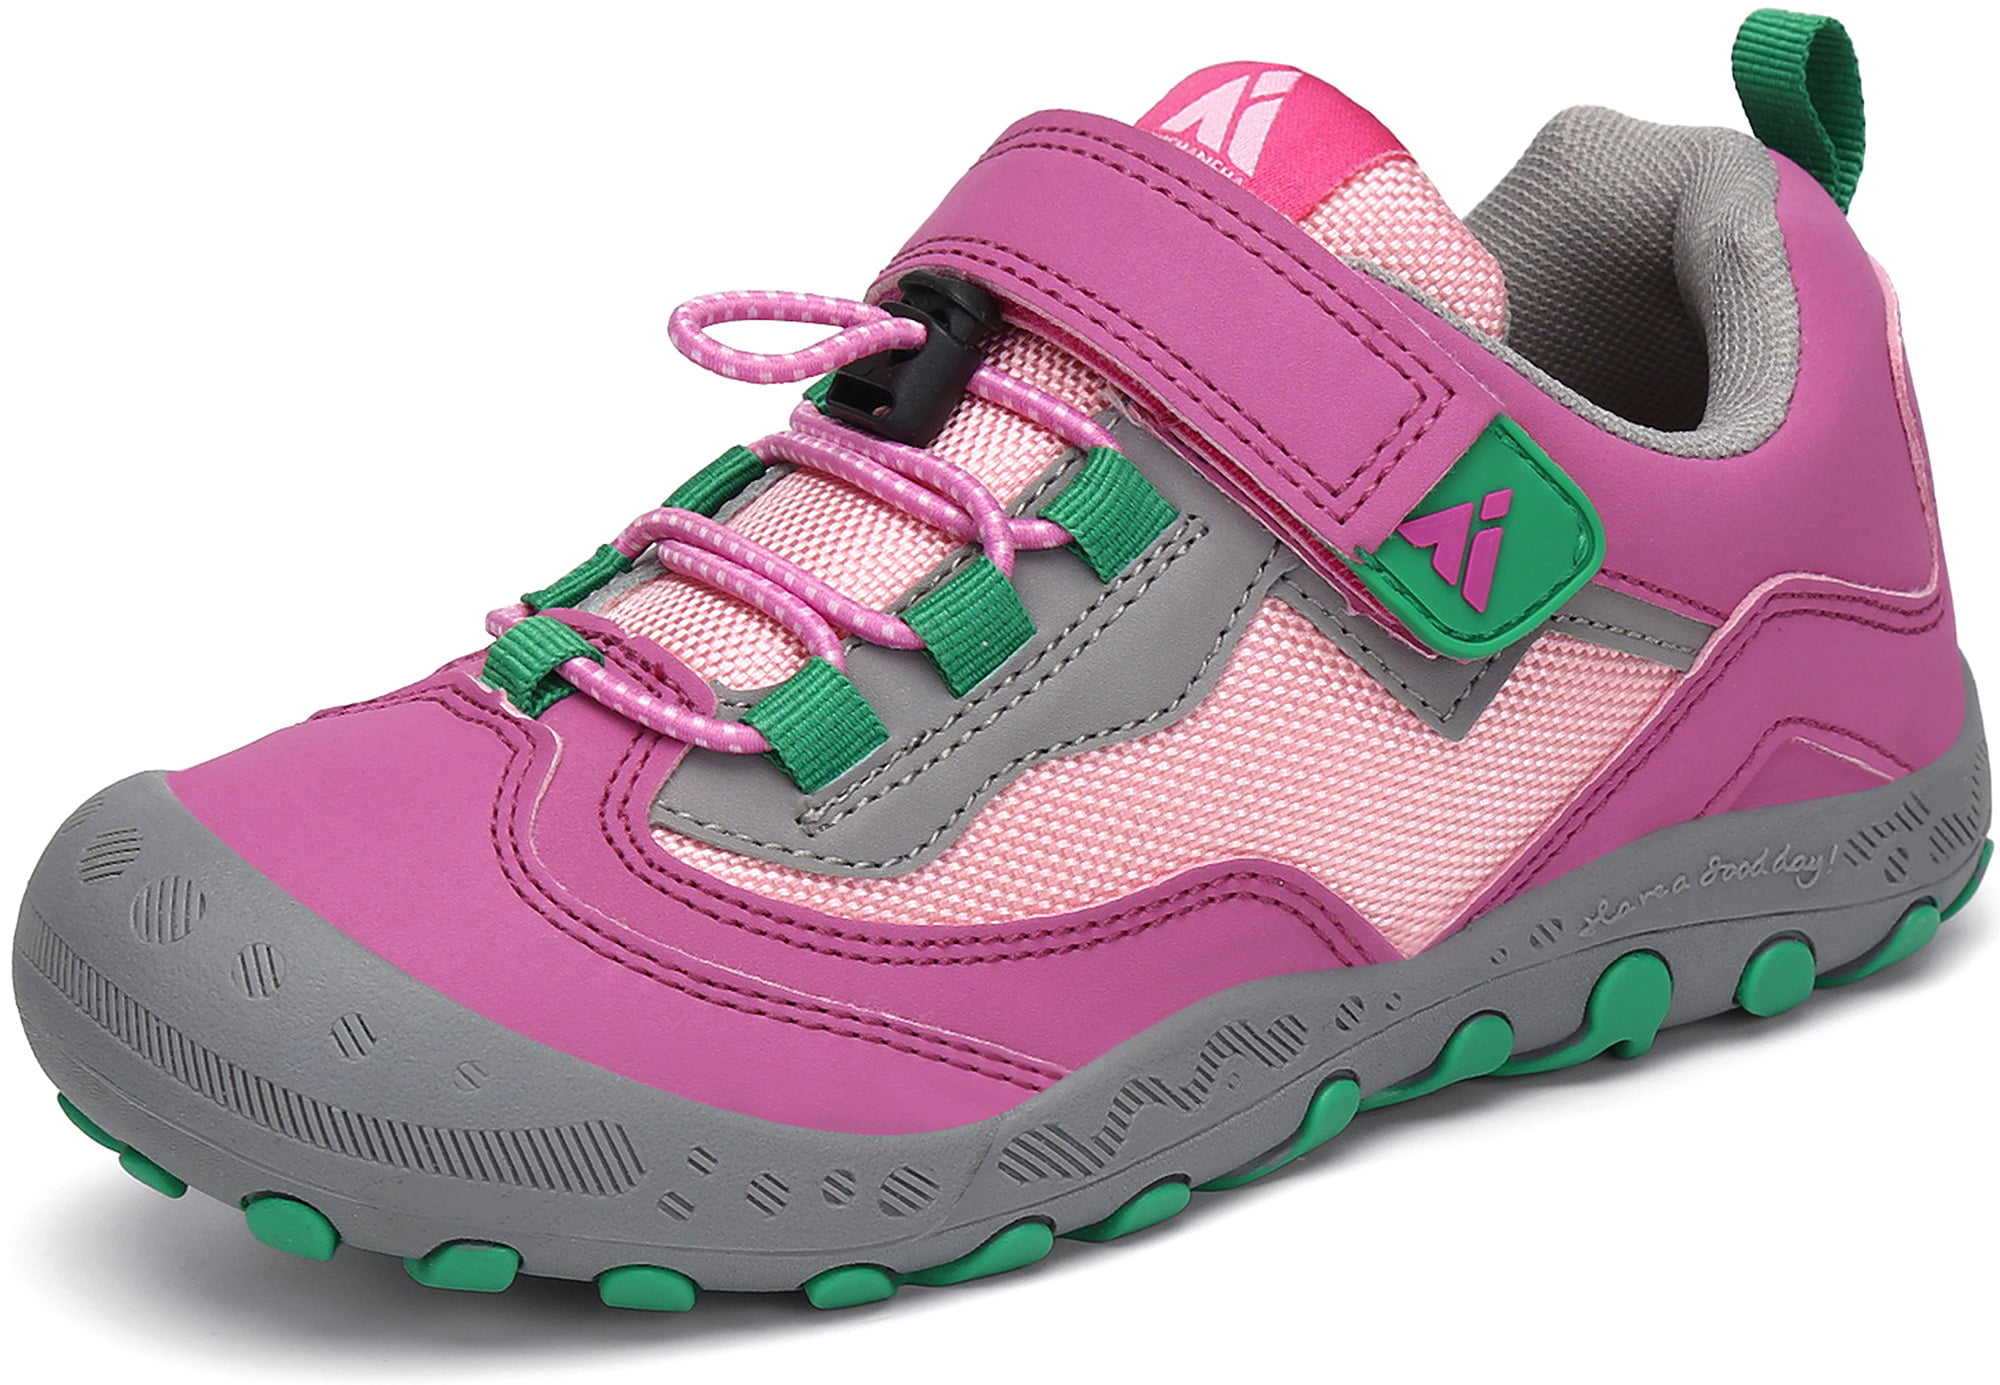 Mishansha Kids Hiking Shoes Breathable Walking Shoes for Girls and Boys Outdoor 